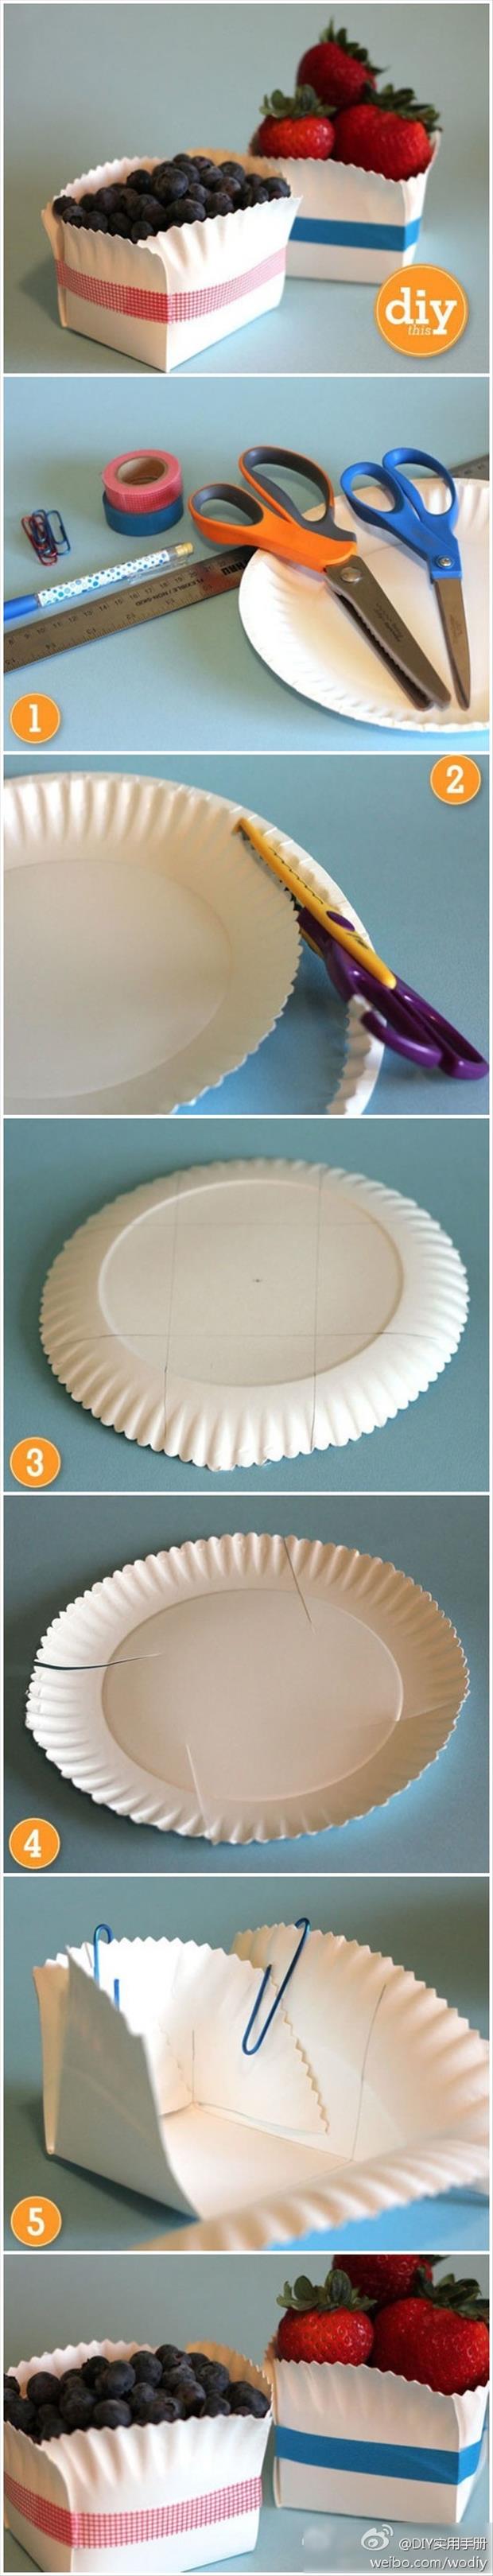 make fruit baskets out of paper plates fun craft ideas